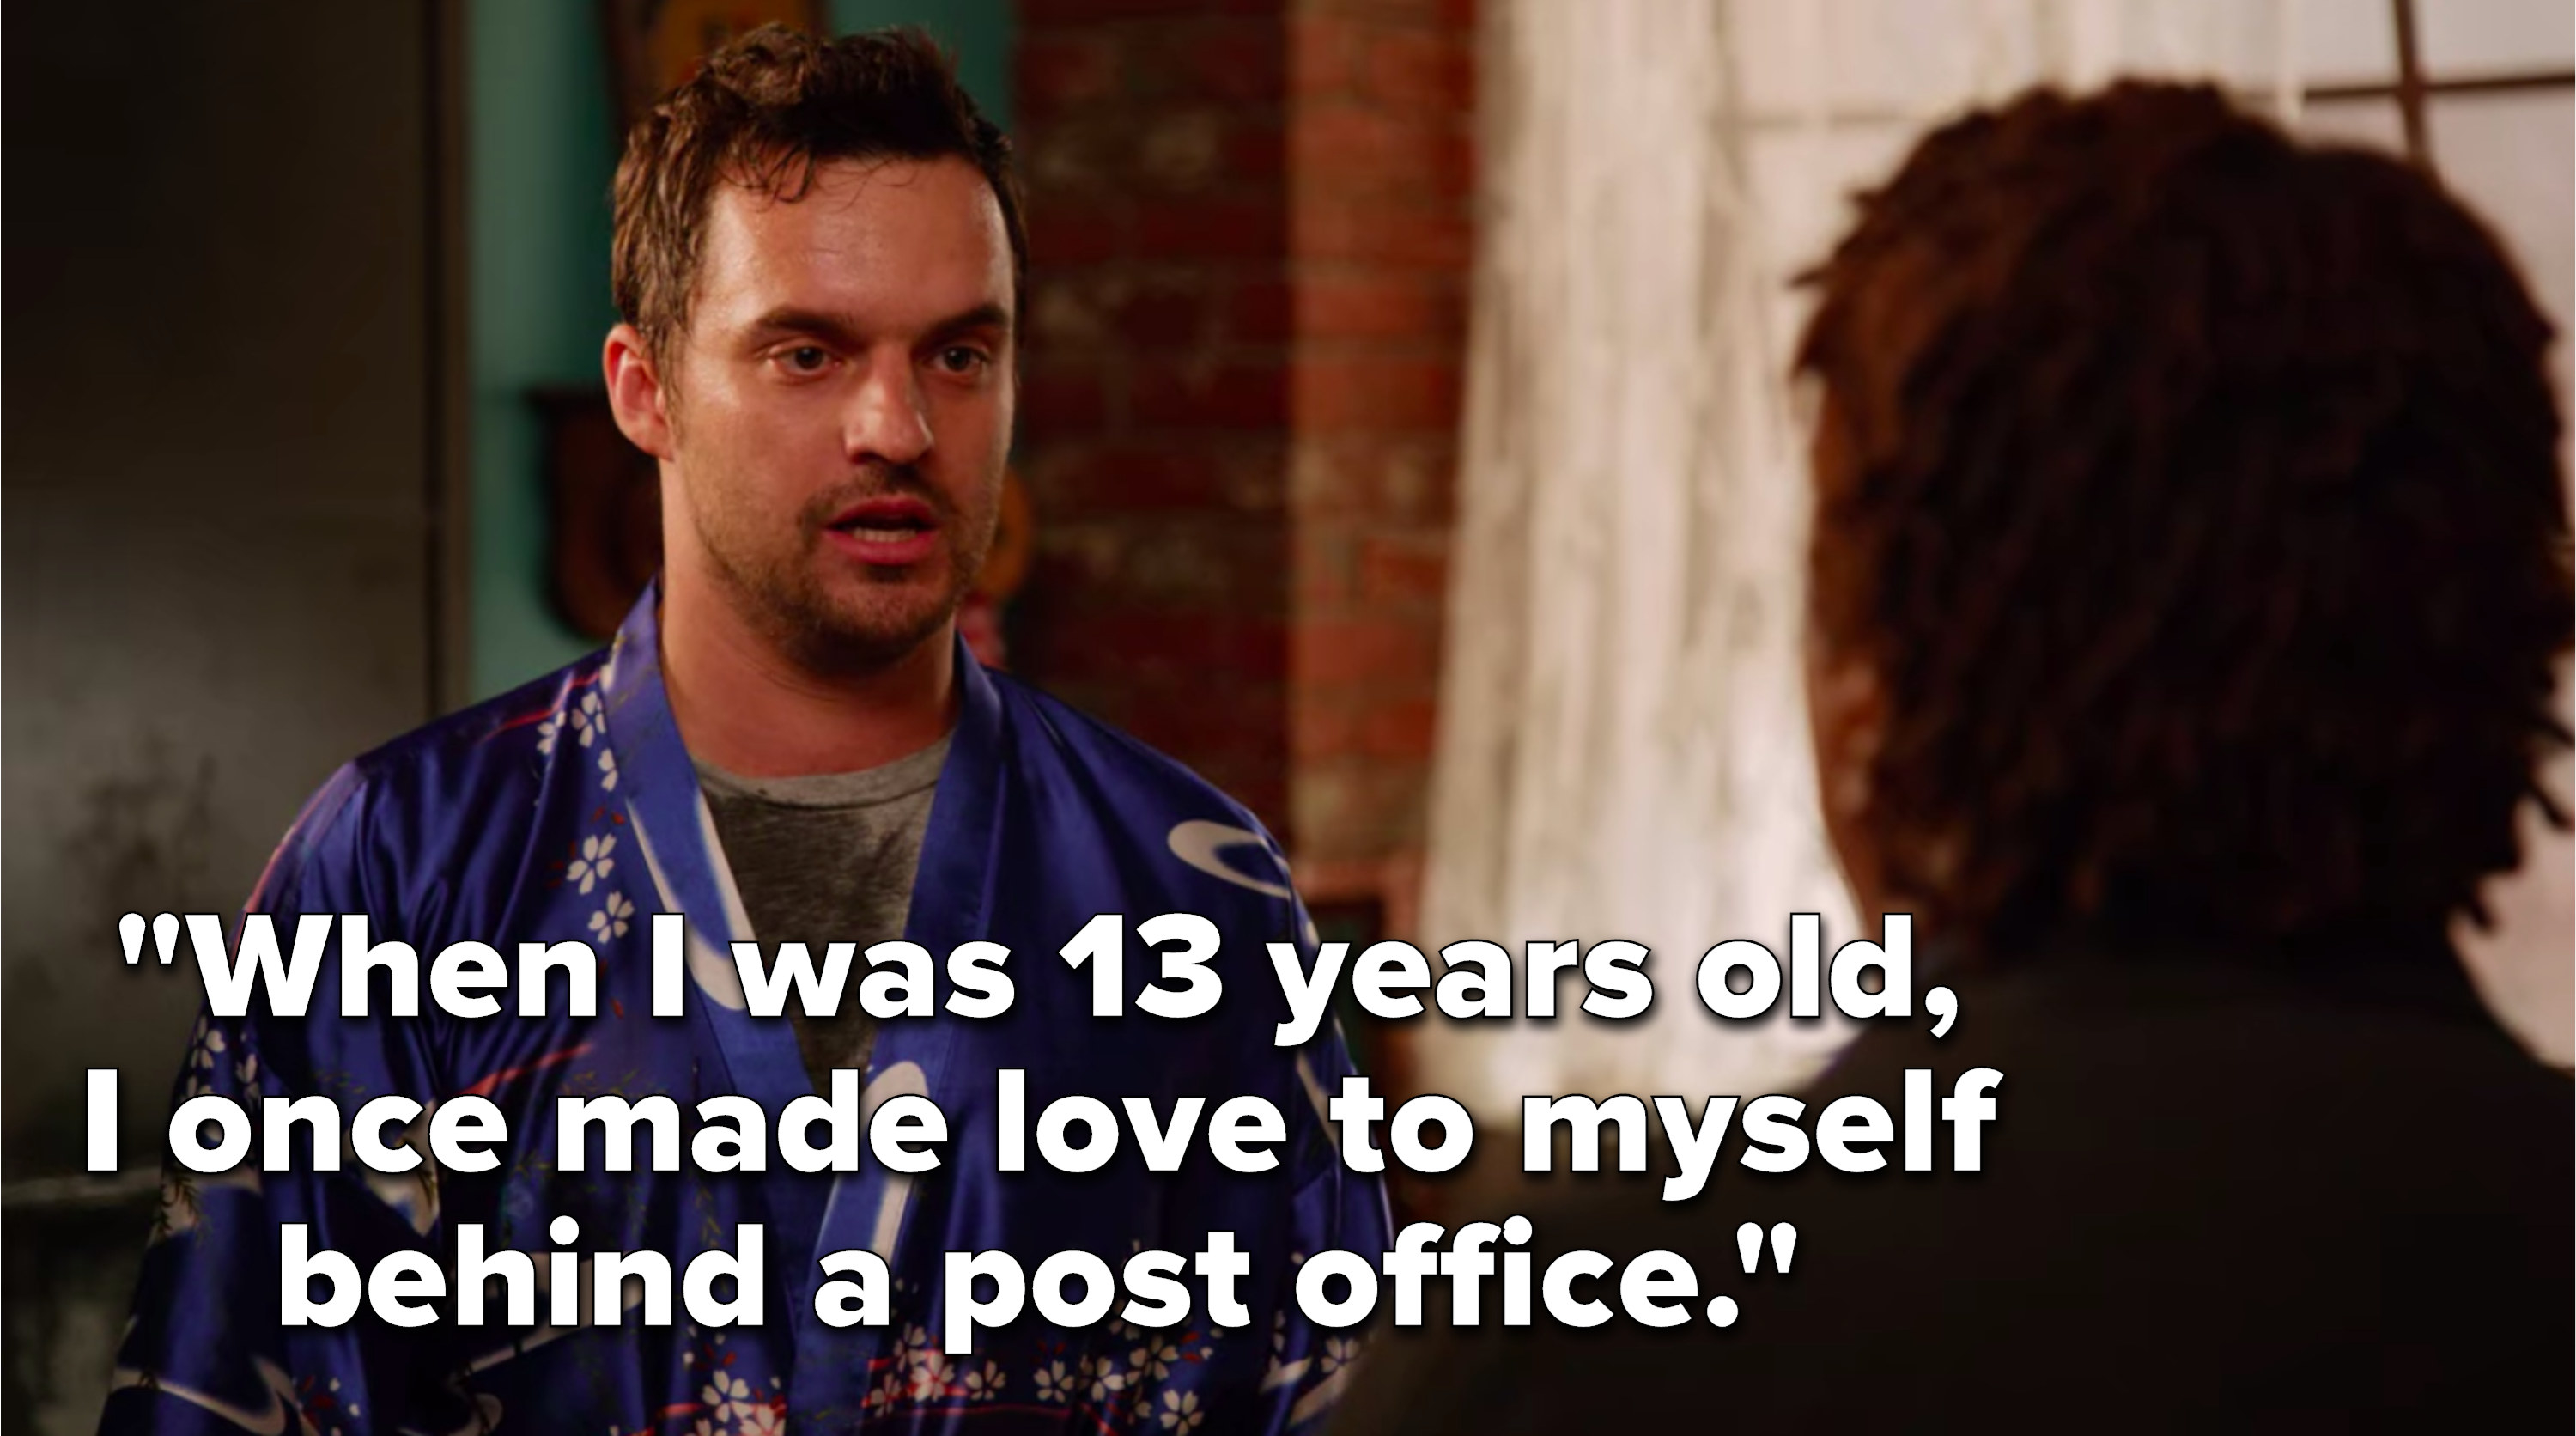 Nick says, &quot;When I was 13 years old, I once made love to myself behind a post office&quot;